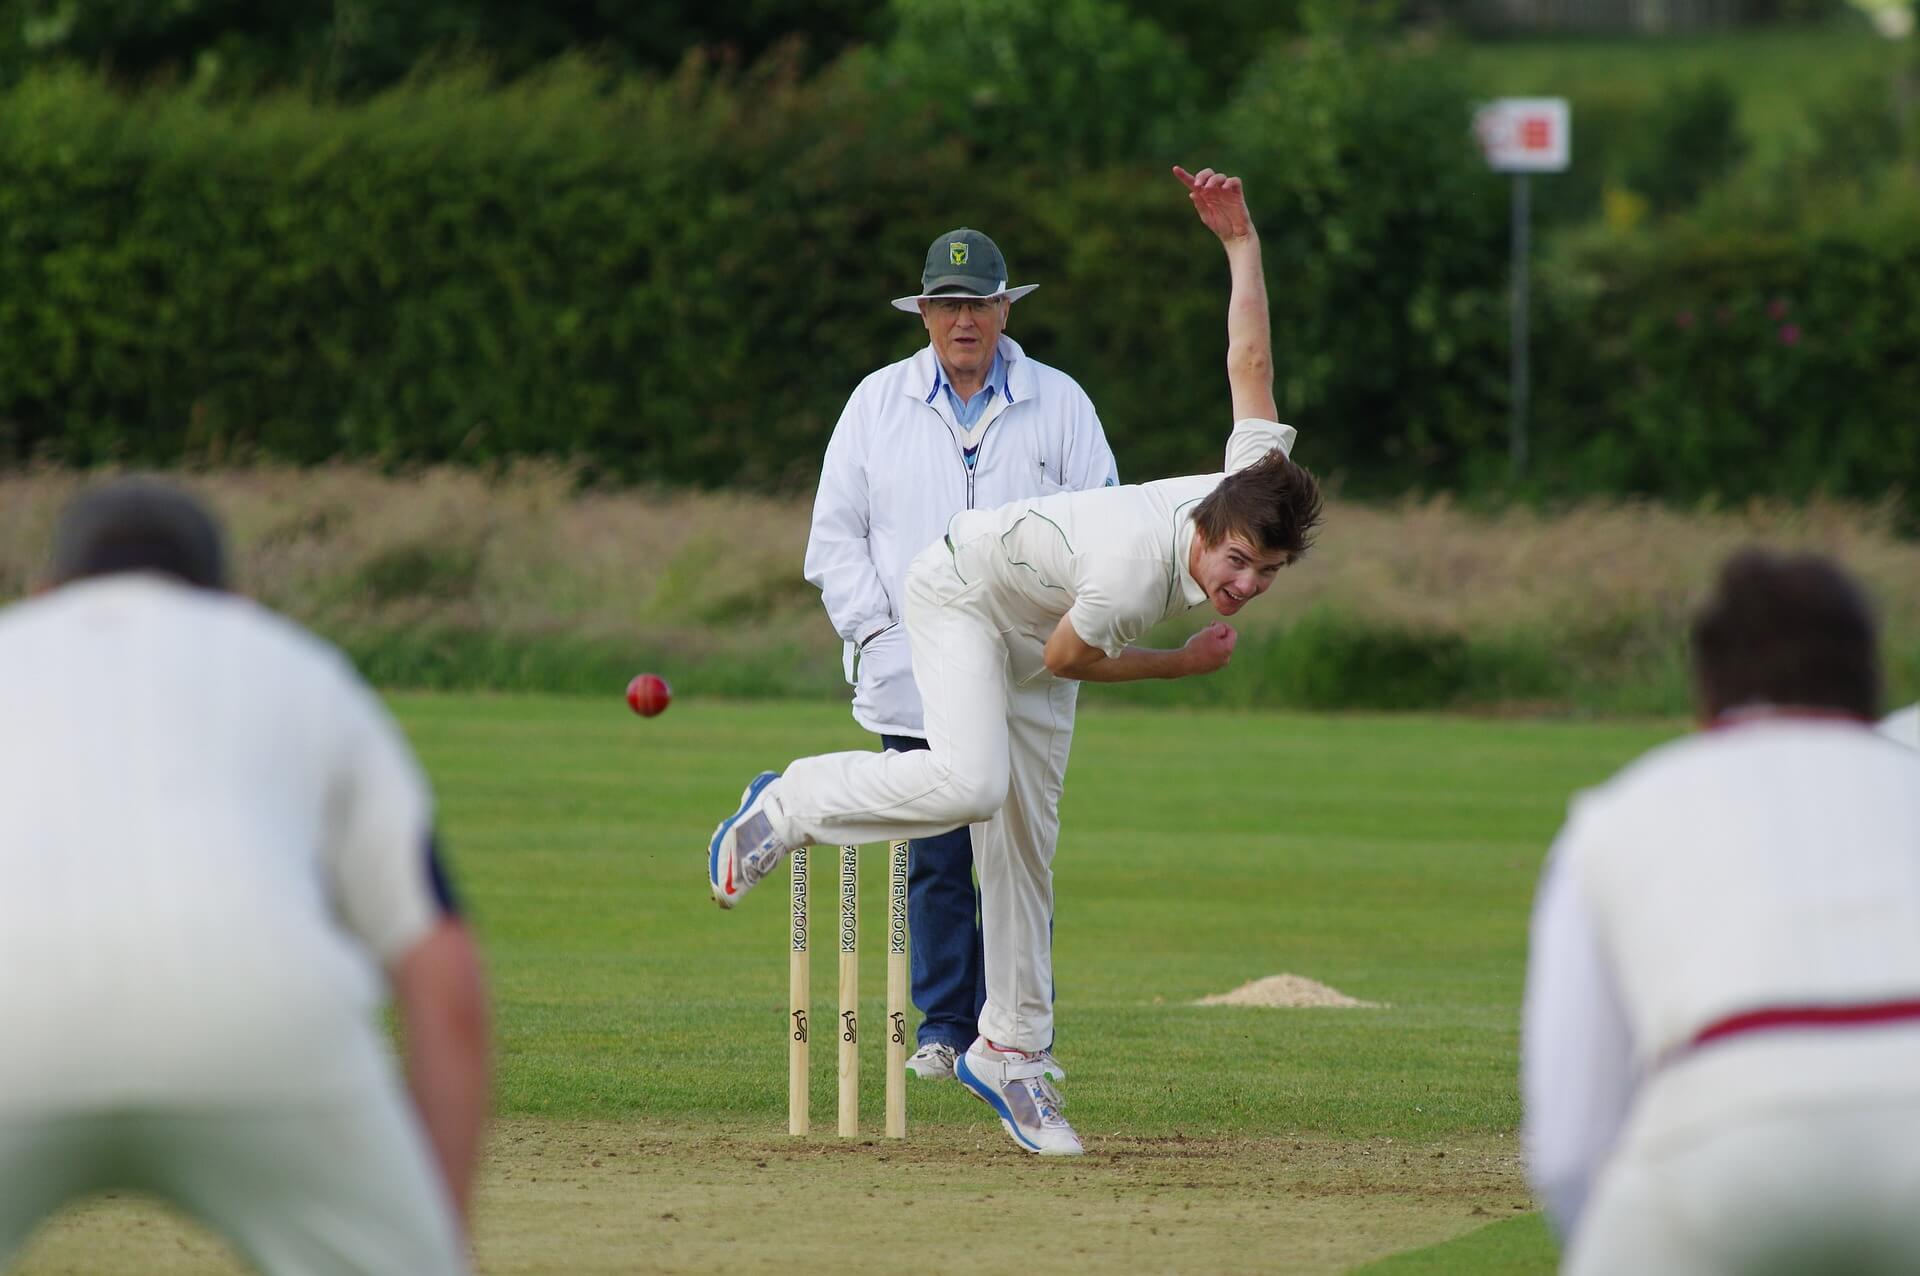 Cricket Injuries - Treatment, Management & Prevention · Remain in the Game